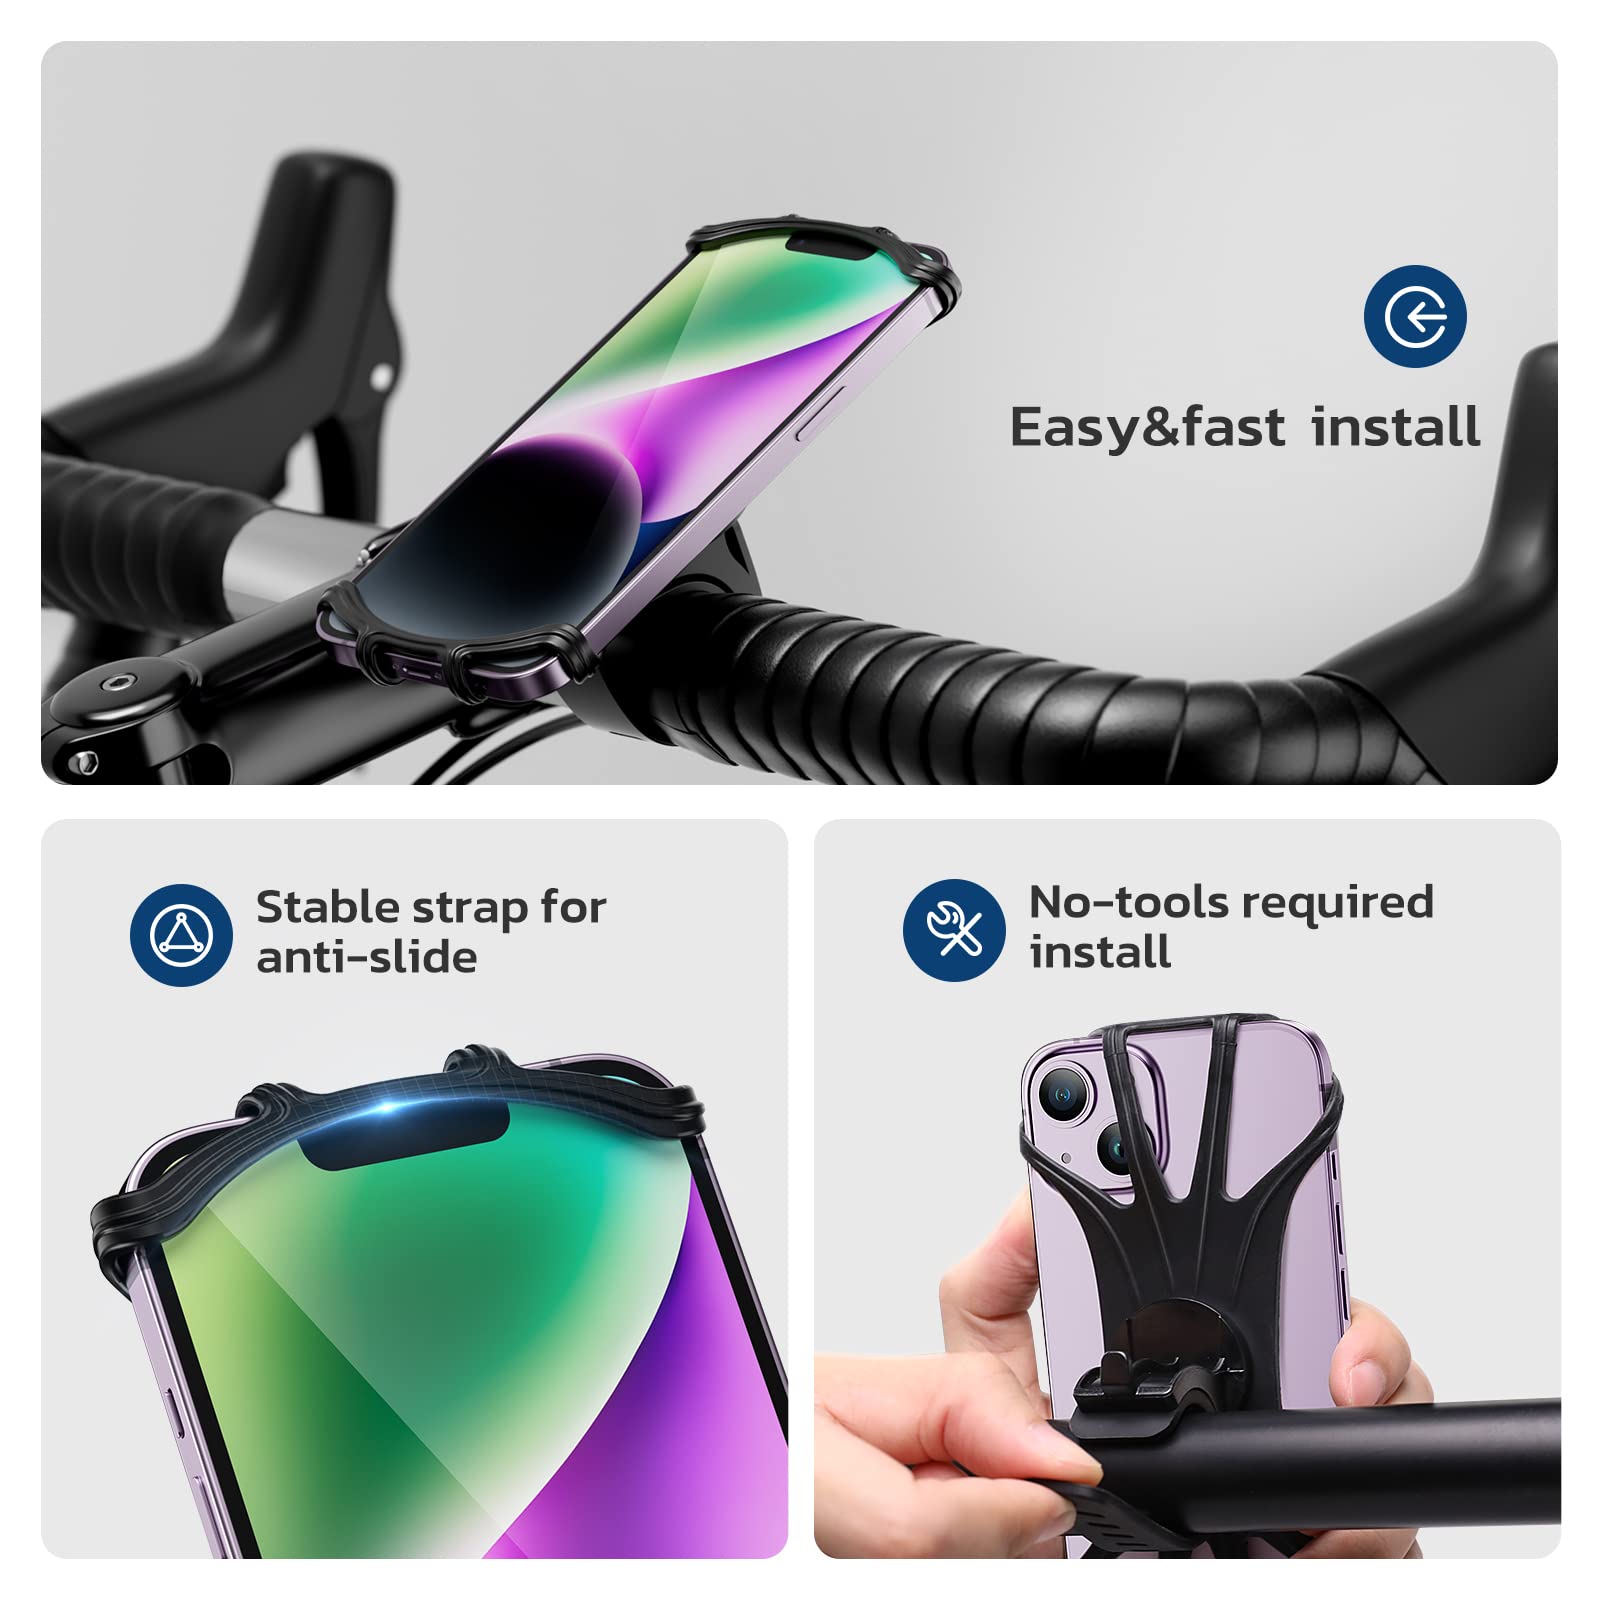 VUP Bike Phone Mount, Universal Bike Cell Phone Holder, 360° Rotatable, Silicone Bicycle Phone Mount Compatible with iPhone 14/13/Pro Max/Pro/mini/12/11/Xs/Max/Xr/X/7/8/Plus, 4.0''~6.7'' Cellphones